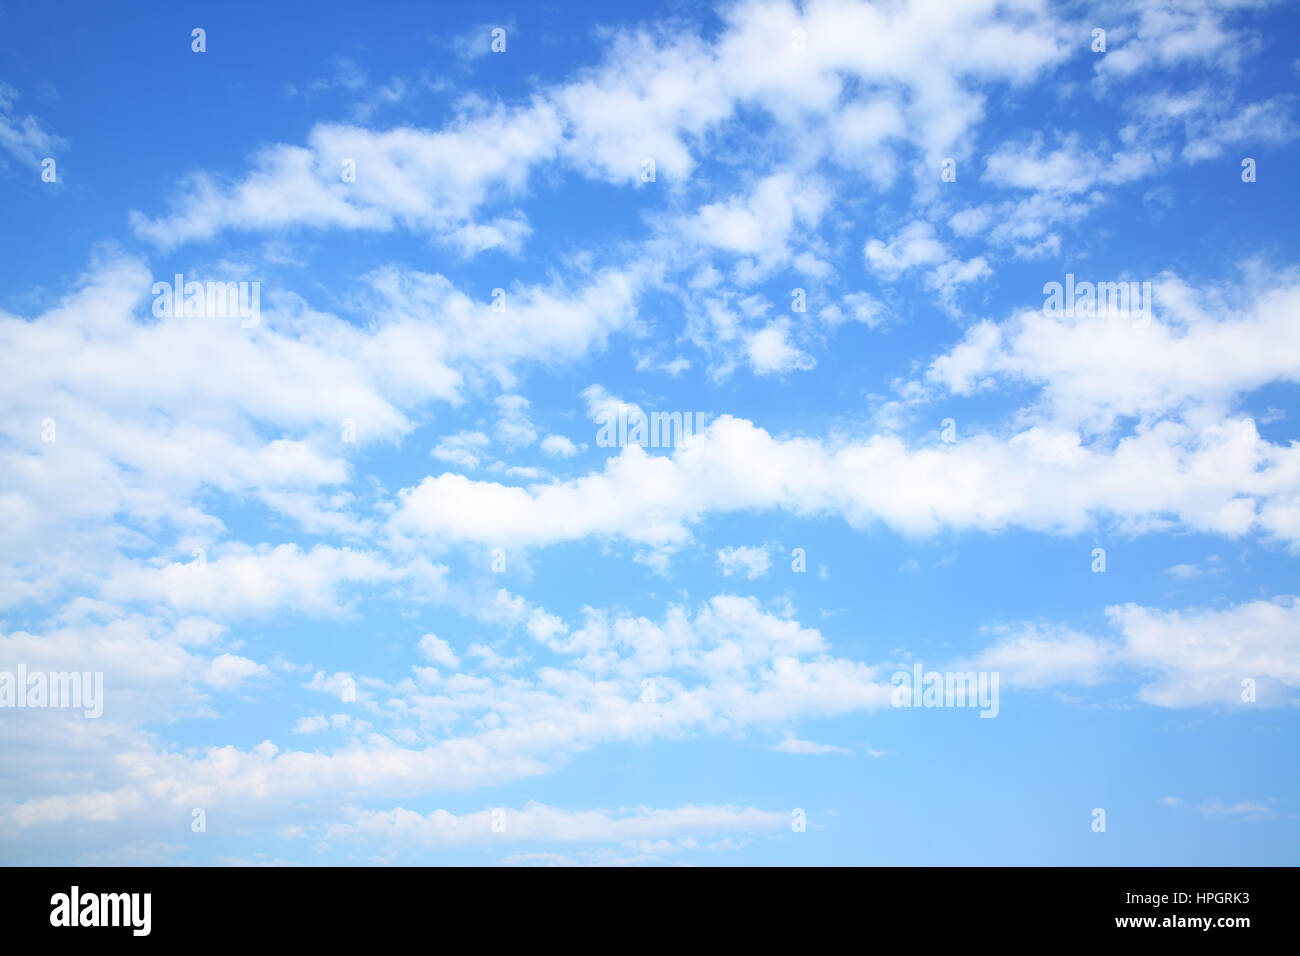 Summer blue sky with clouds Stock Photo